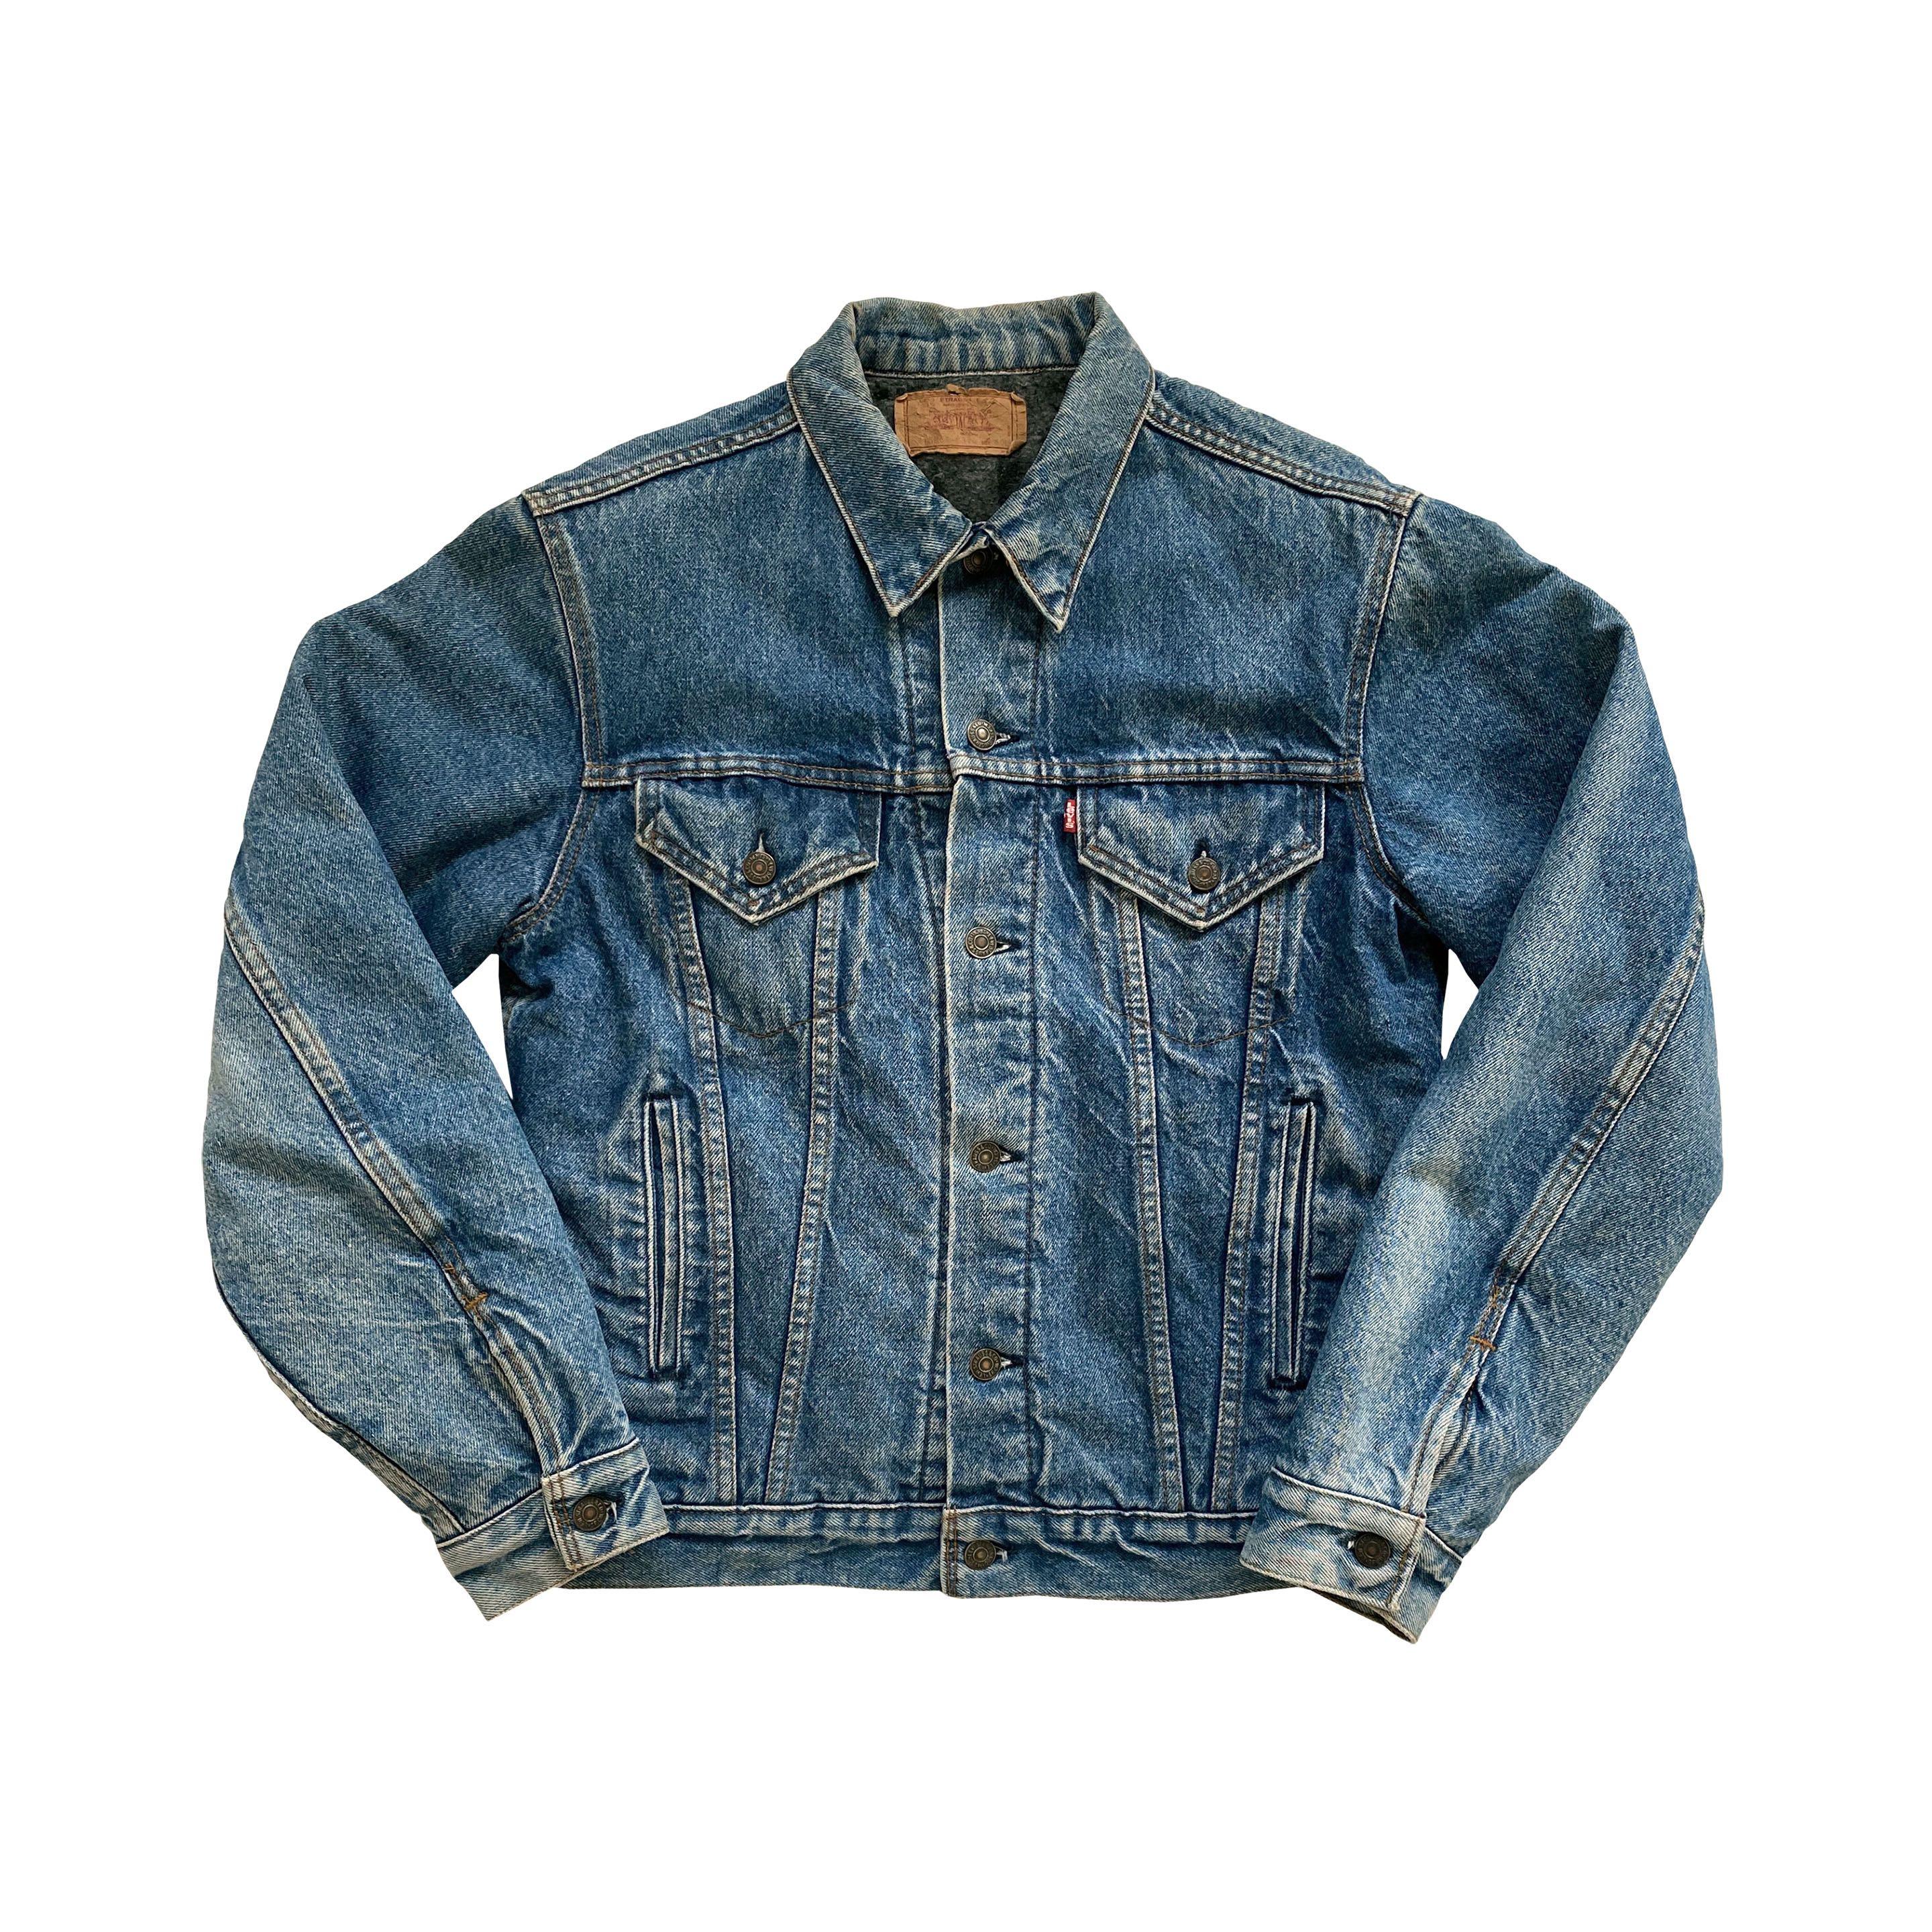 vintage levis denim jacket made in usa, Men's Fashion, Tops & Sets, Hoodies  on Carousell